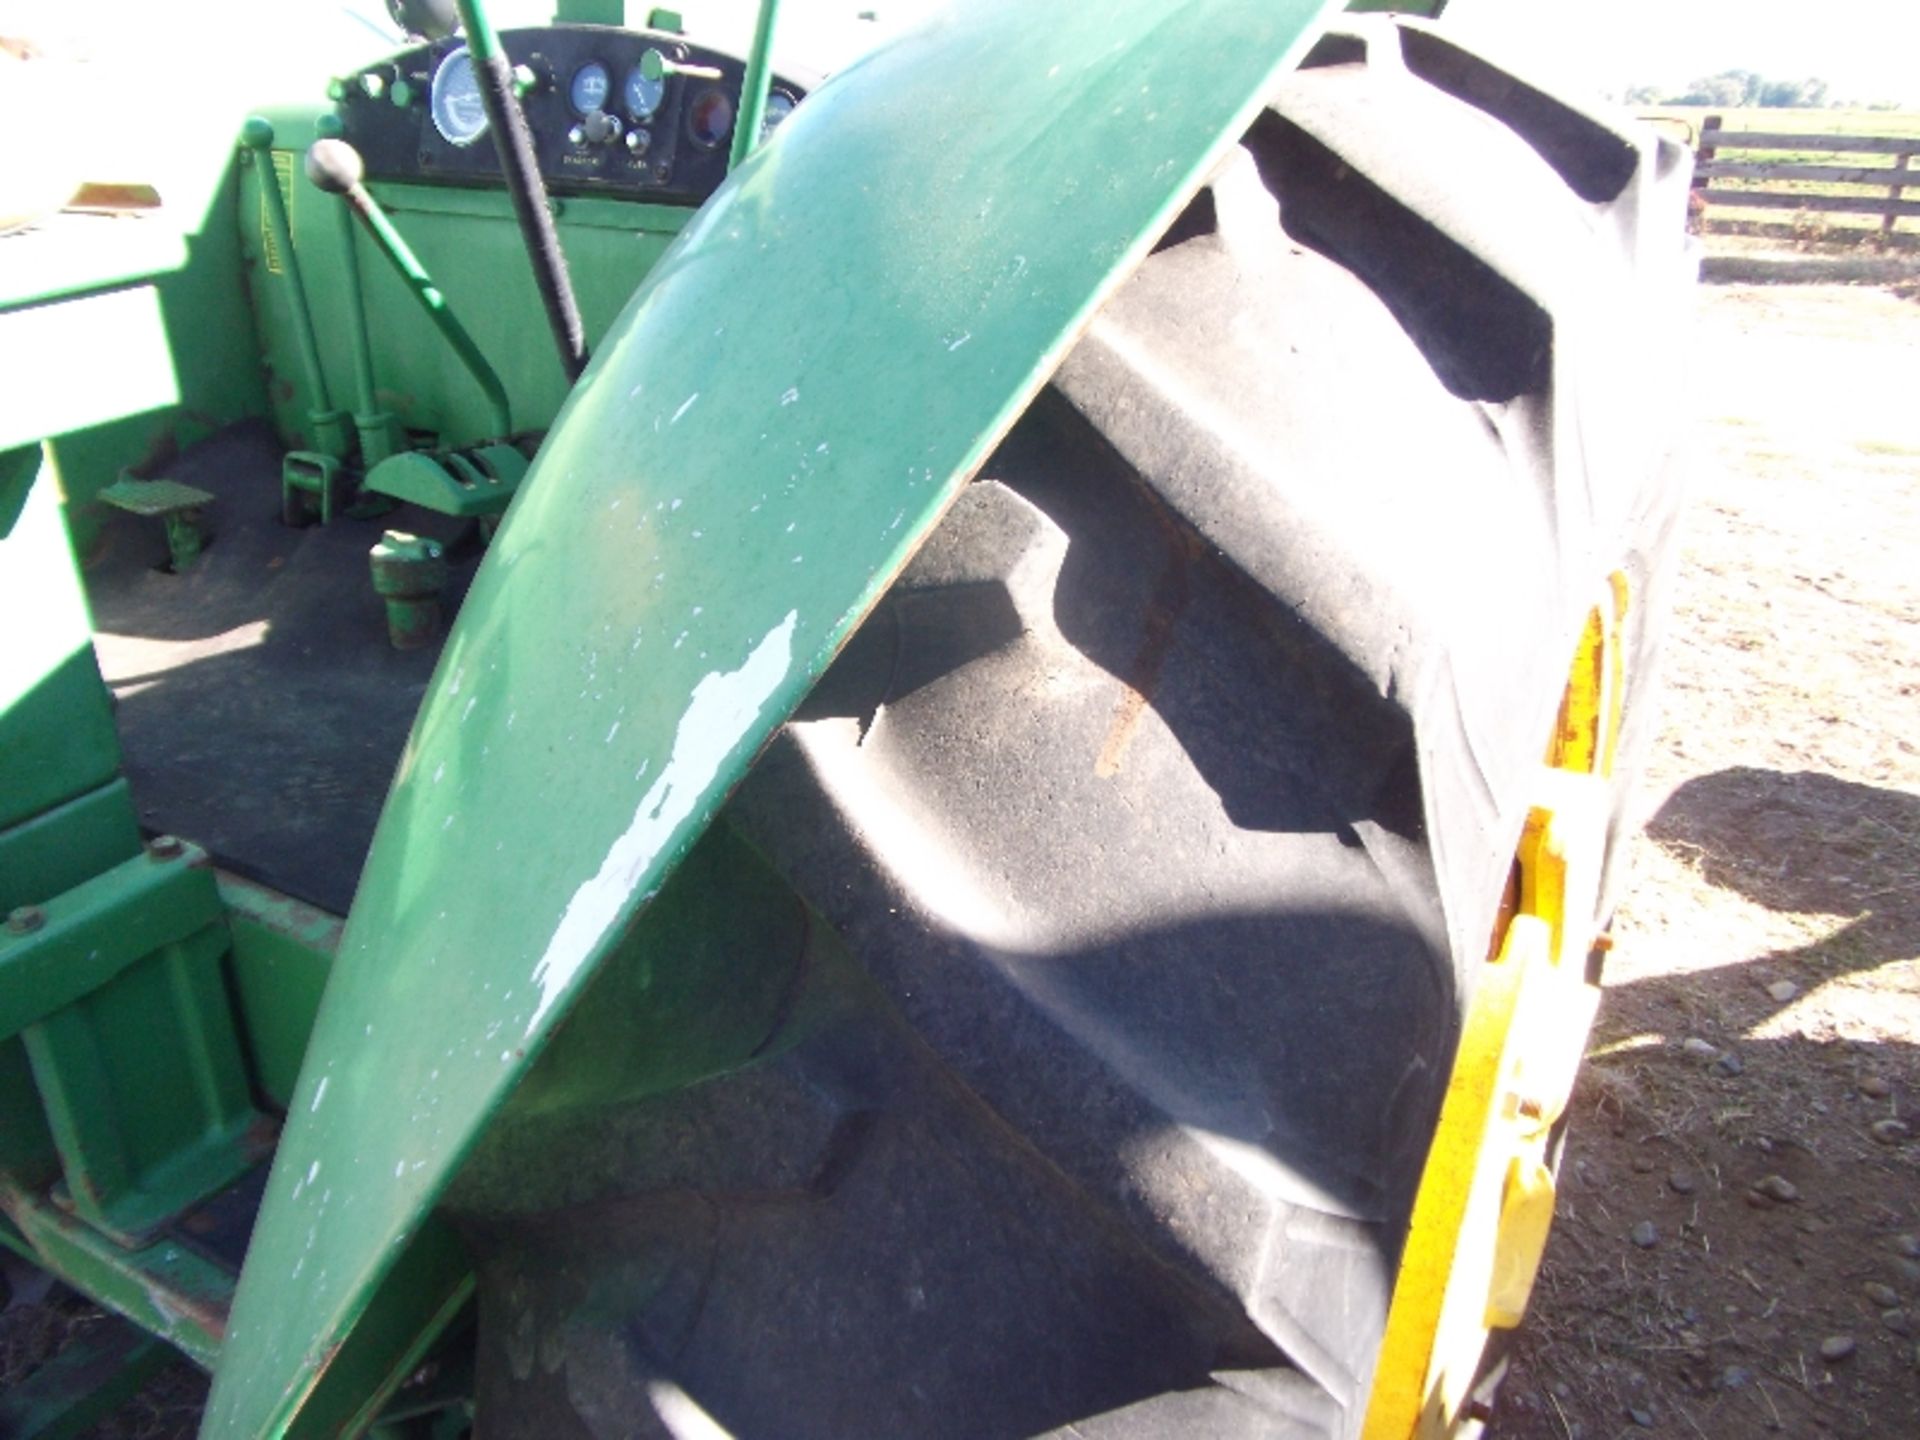 JD 820 diesel power steering 2 hyd remotes wide front pony start ser# 820491A 5299 hrs - Image 5 of 11